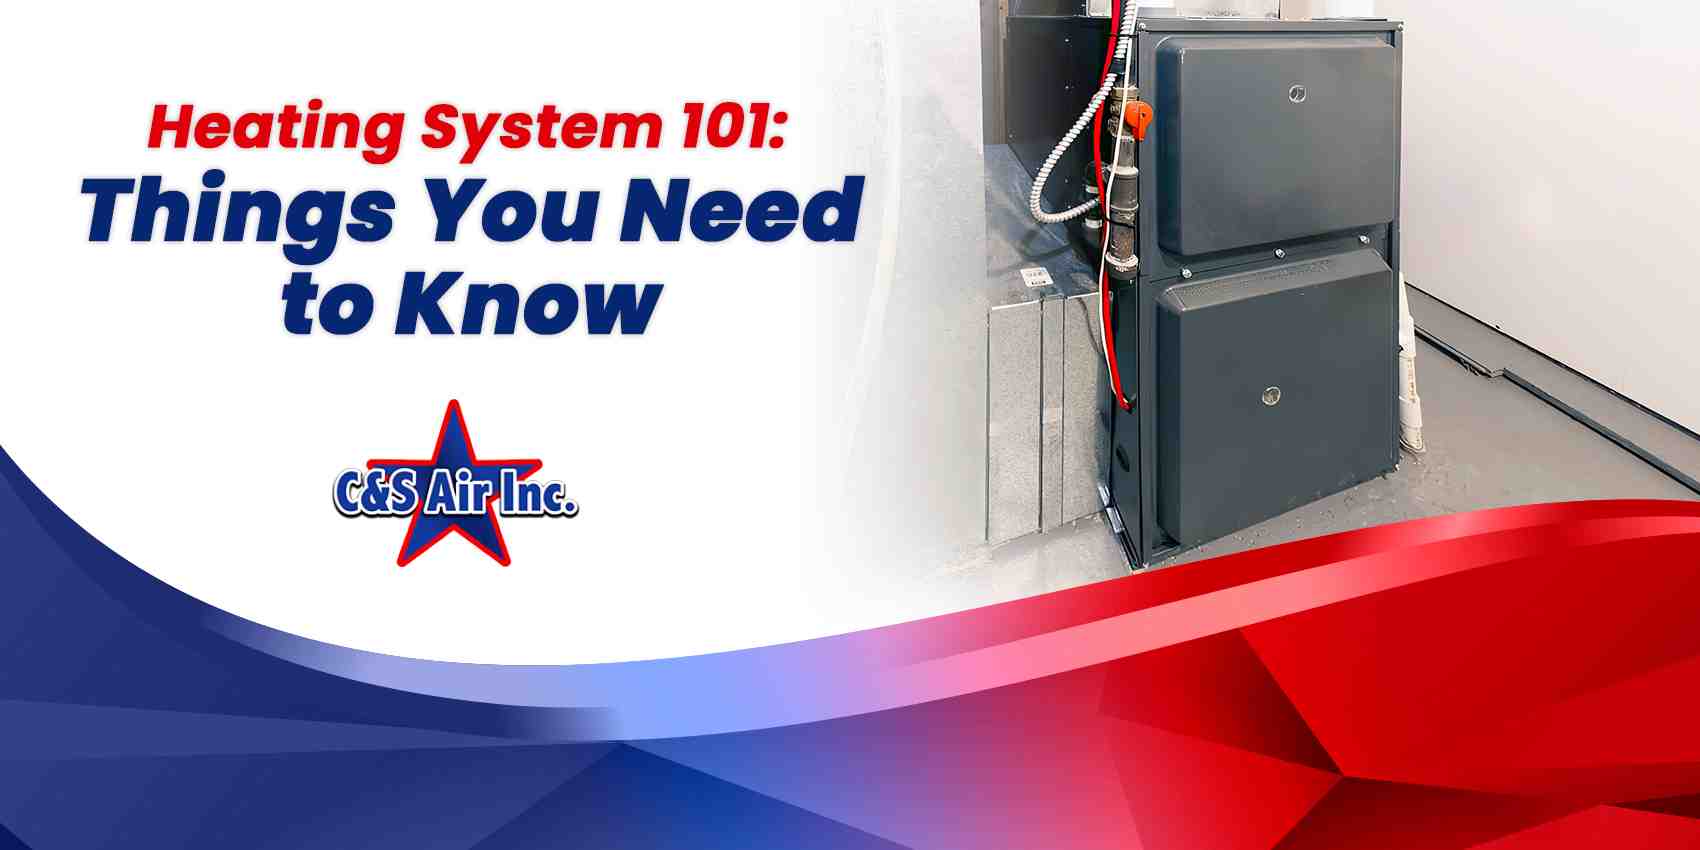 Heating System 101: Things You Need to Know